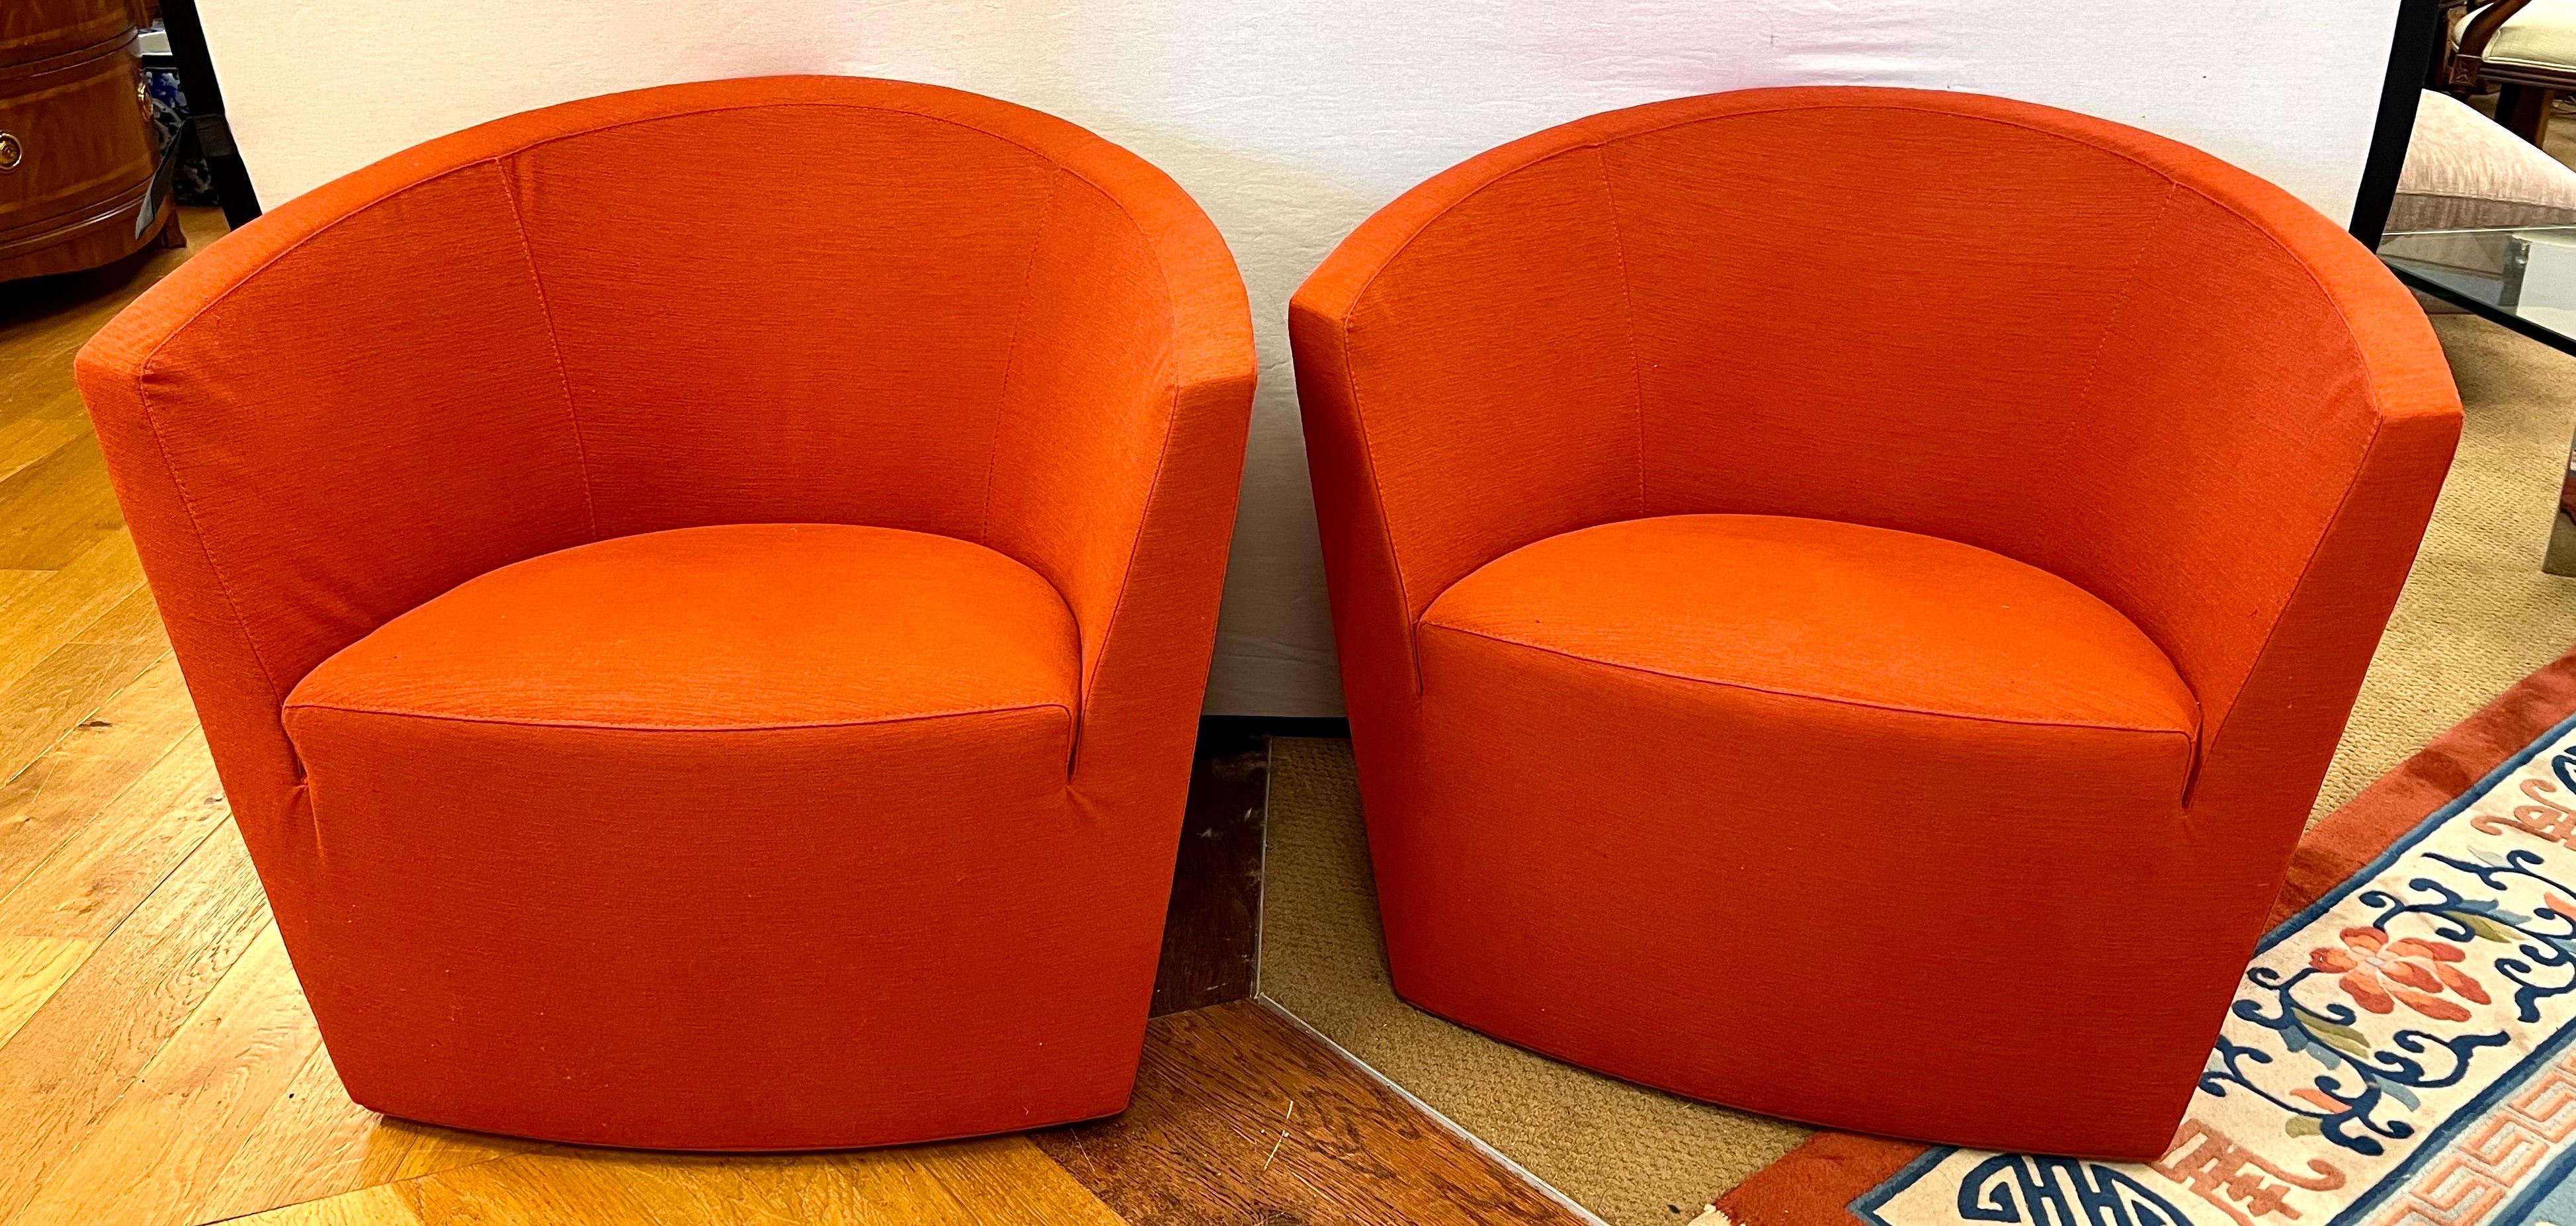 Pair of Tacchini streamlined swivel chairs boasts a barrel silhouette and is a versatile addition to your space. Upholstered in an orange linen fabric.
Made in Italy.